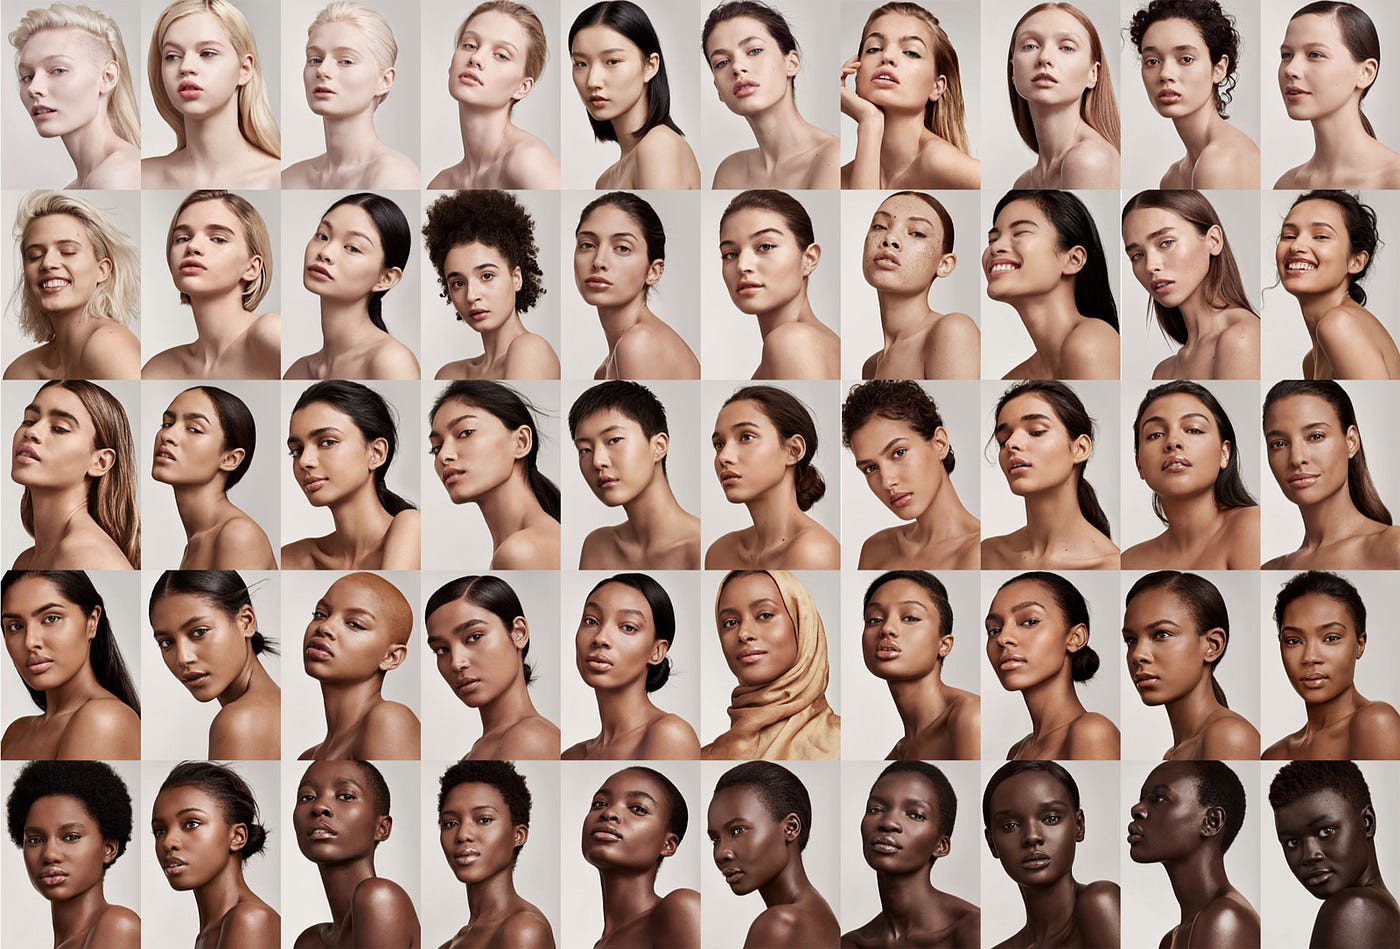 Fenty beauty models with 50 different skin types, from light-skinned to dark-skinned.